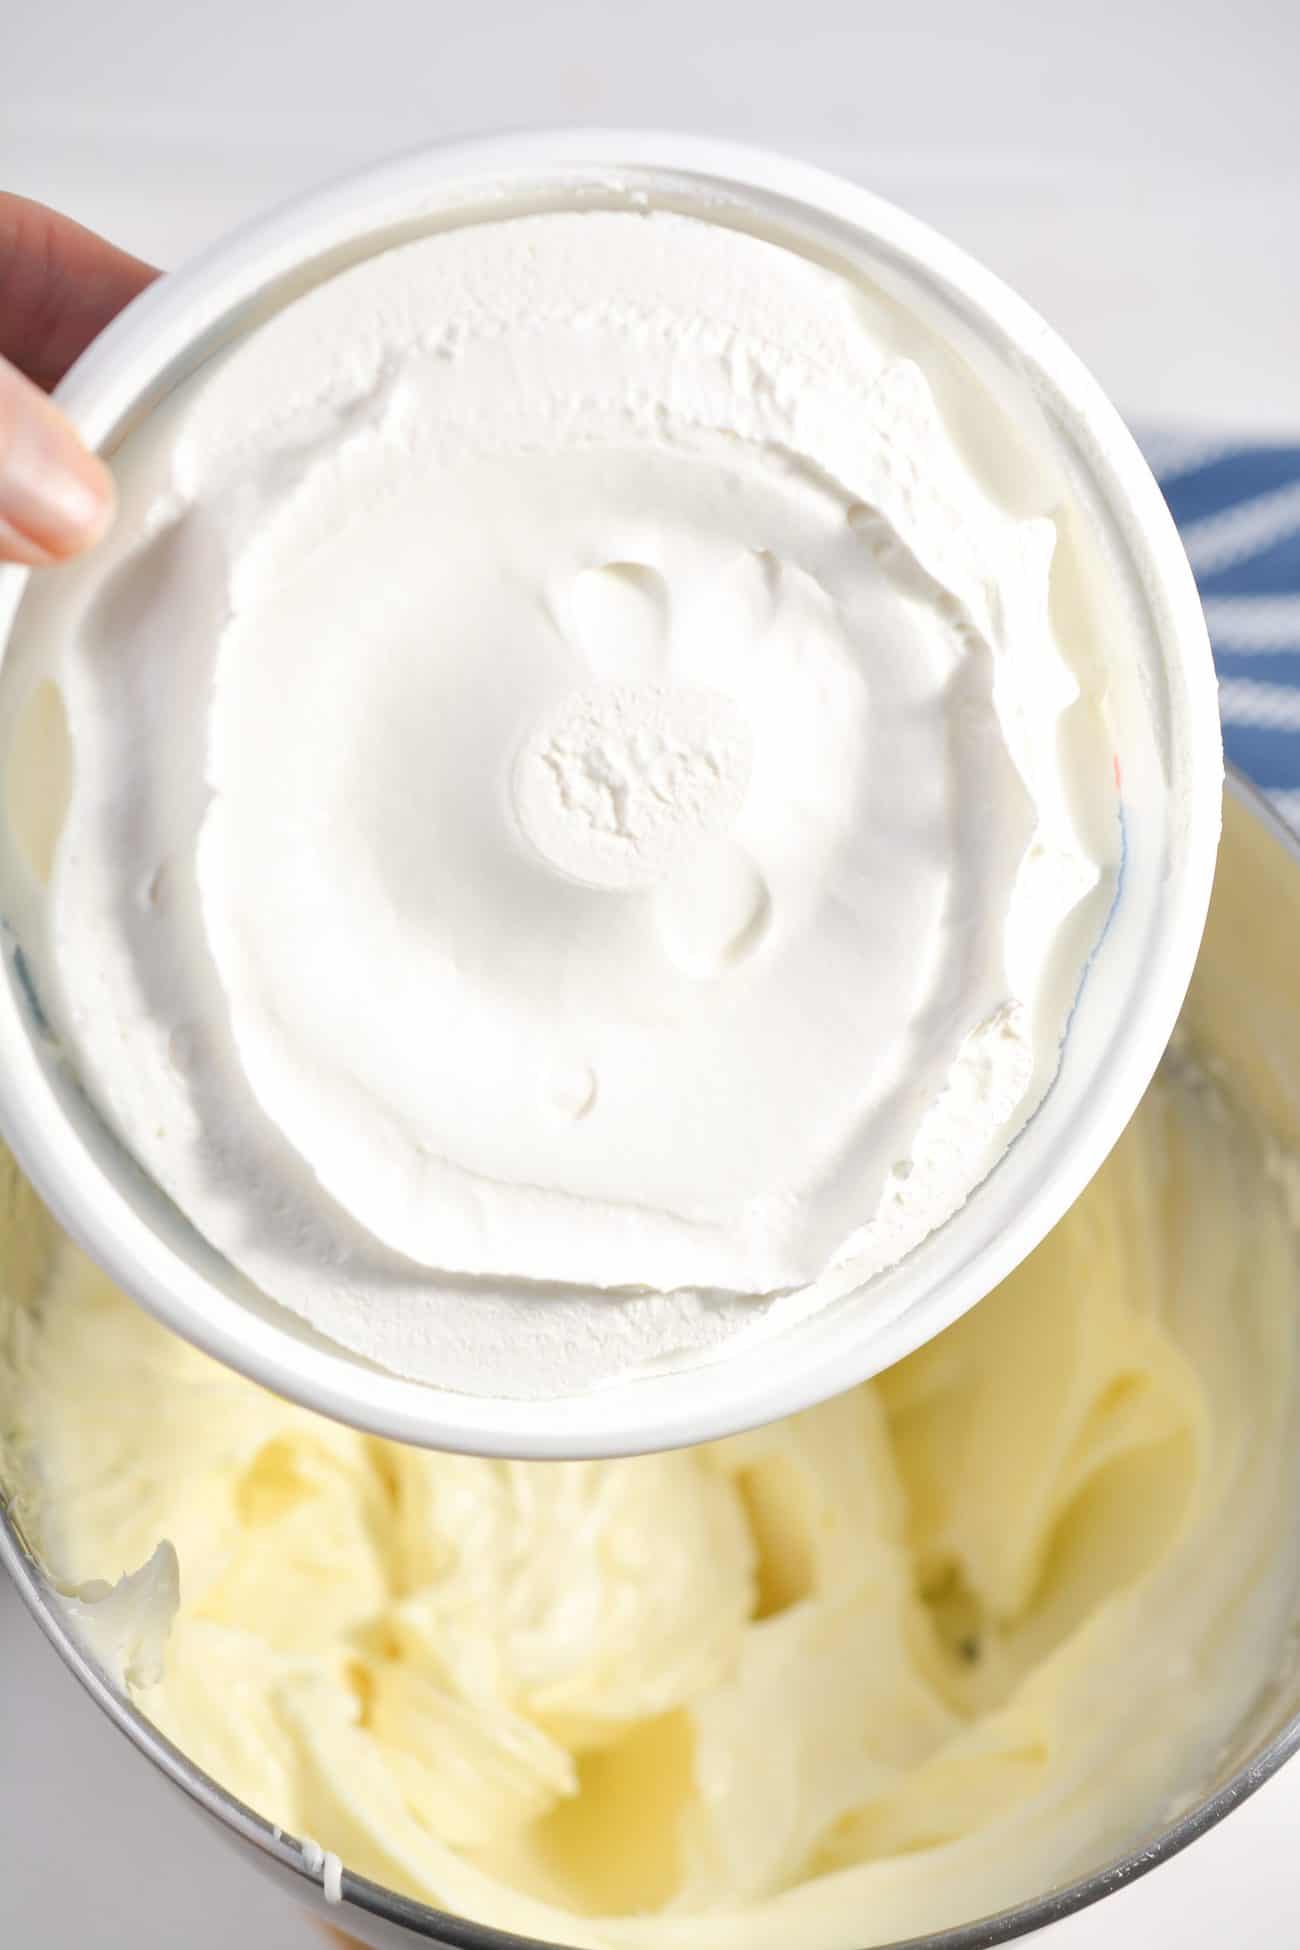 Fold the cool whip into the cream cheese mixture.